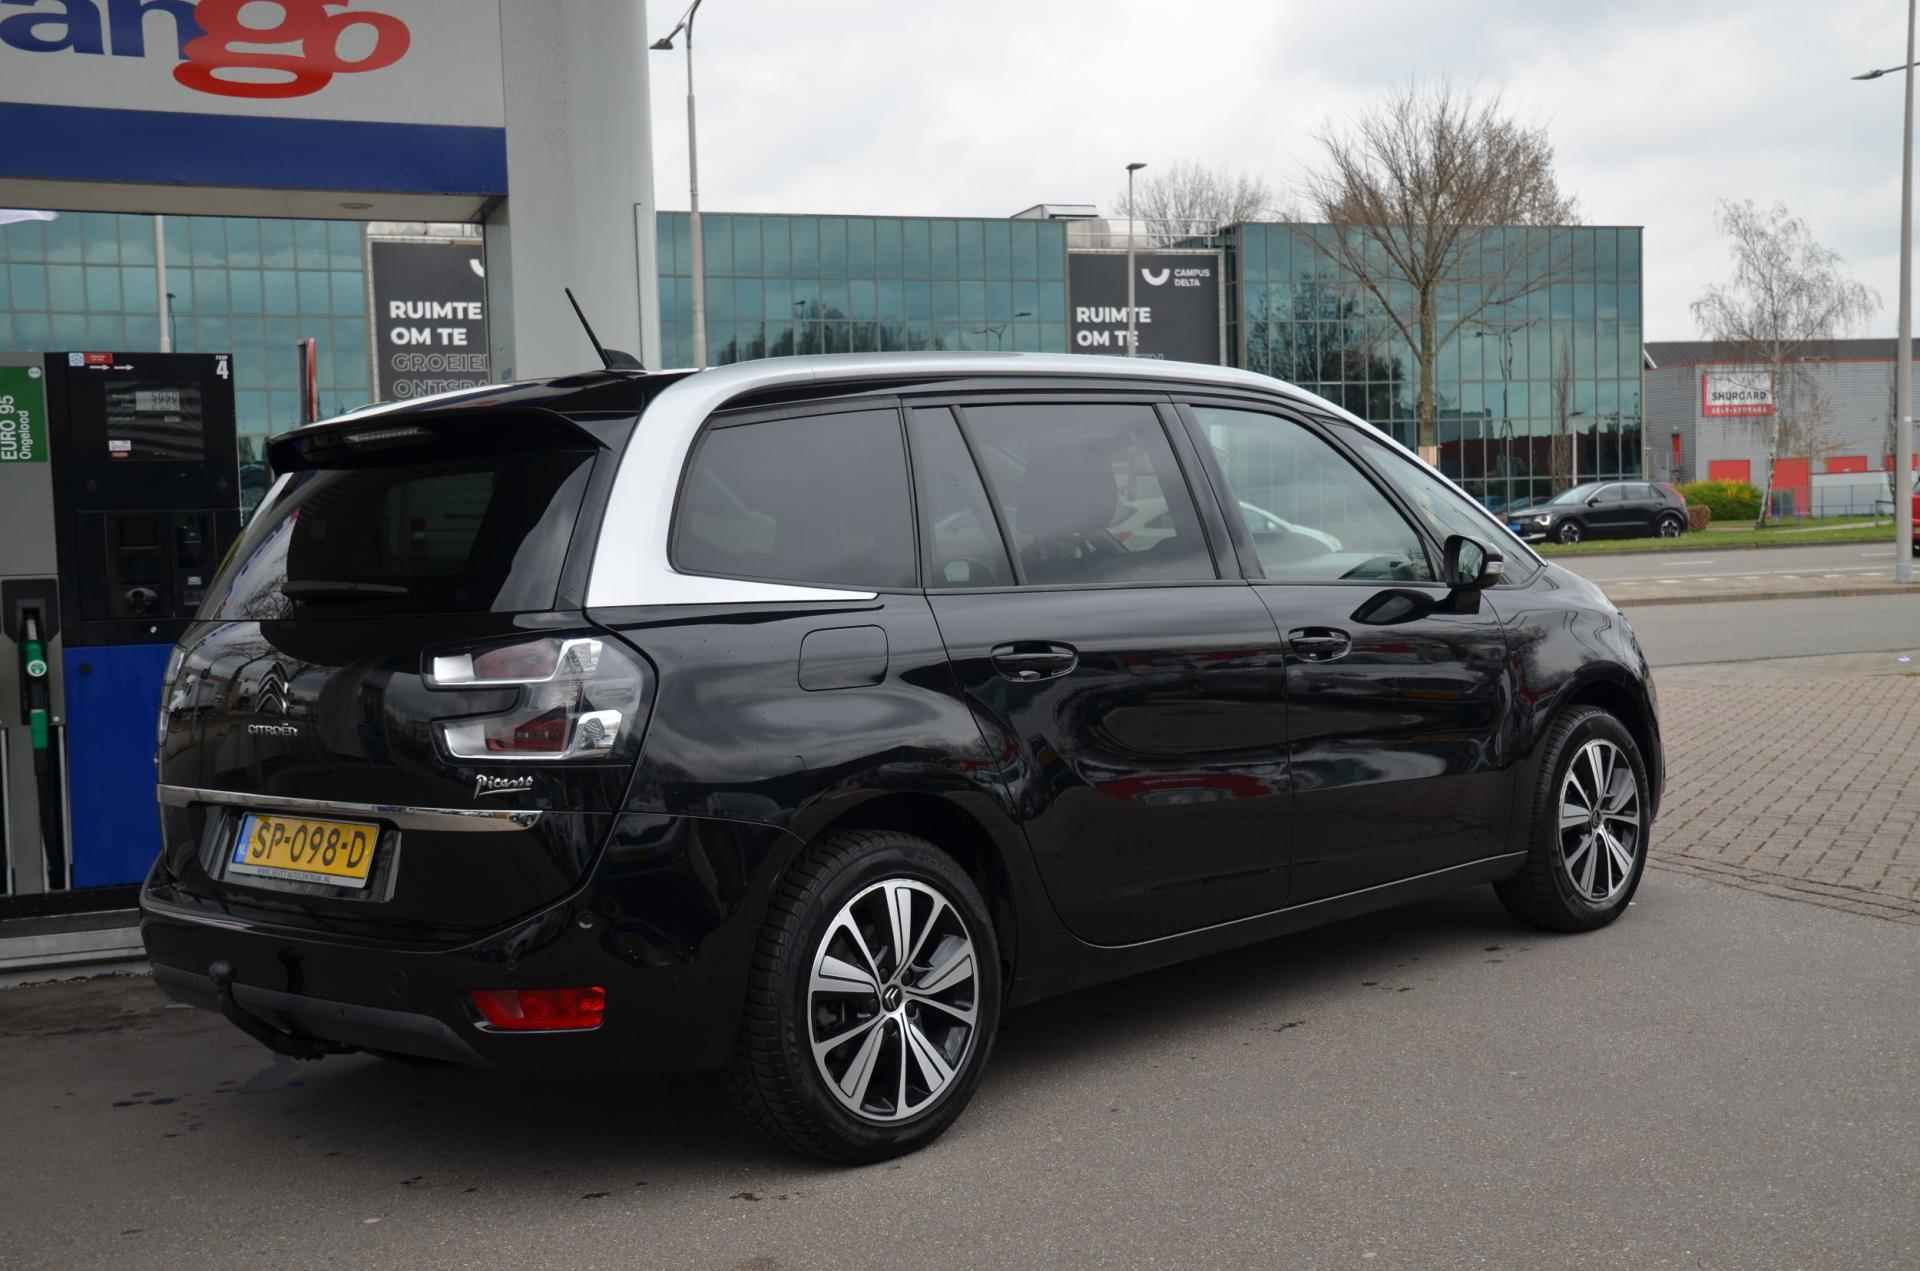 Citroen Grand C4 Picasso 1.2 7 PERS|7 PERSOONS|2E PAASDAG OPEN. - 7/30